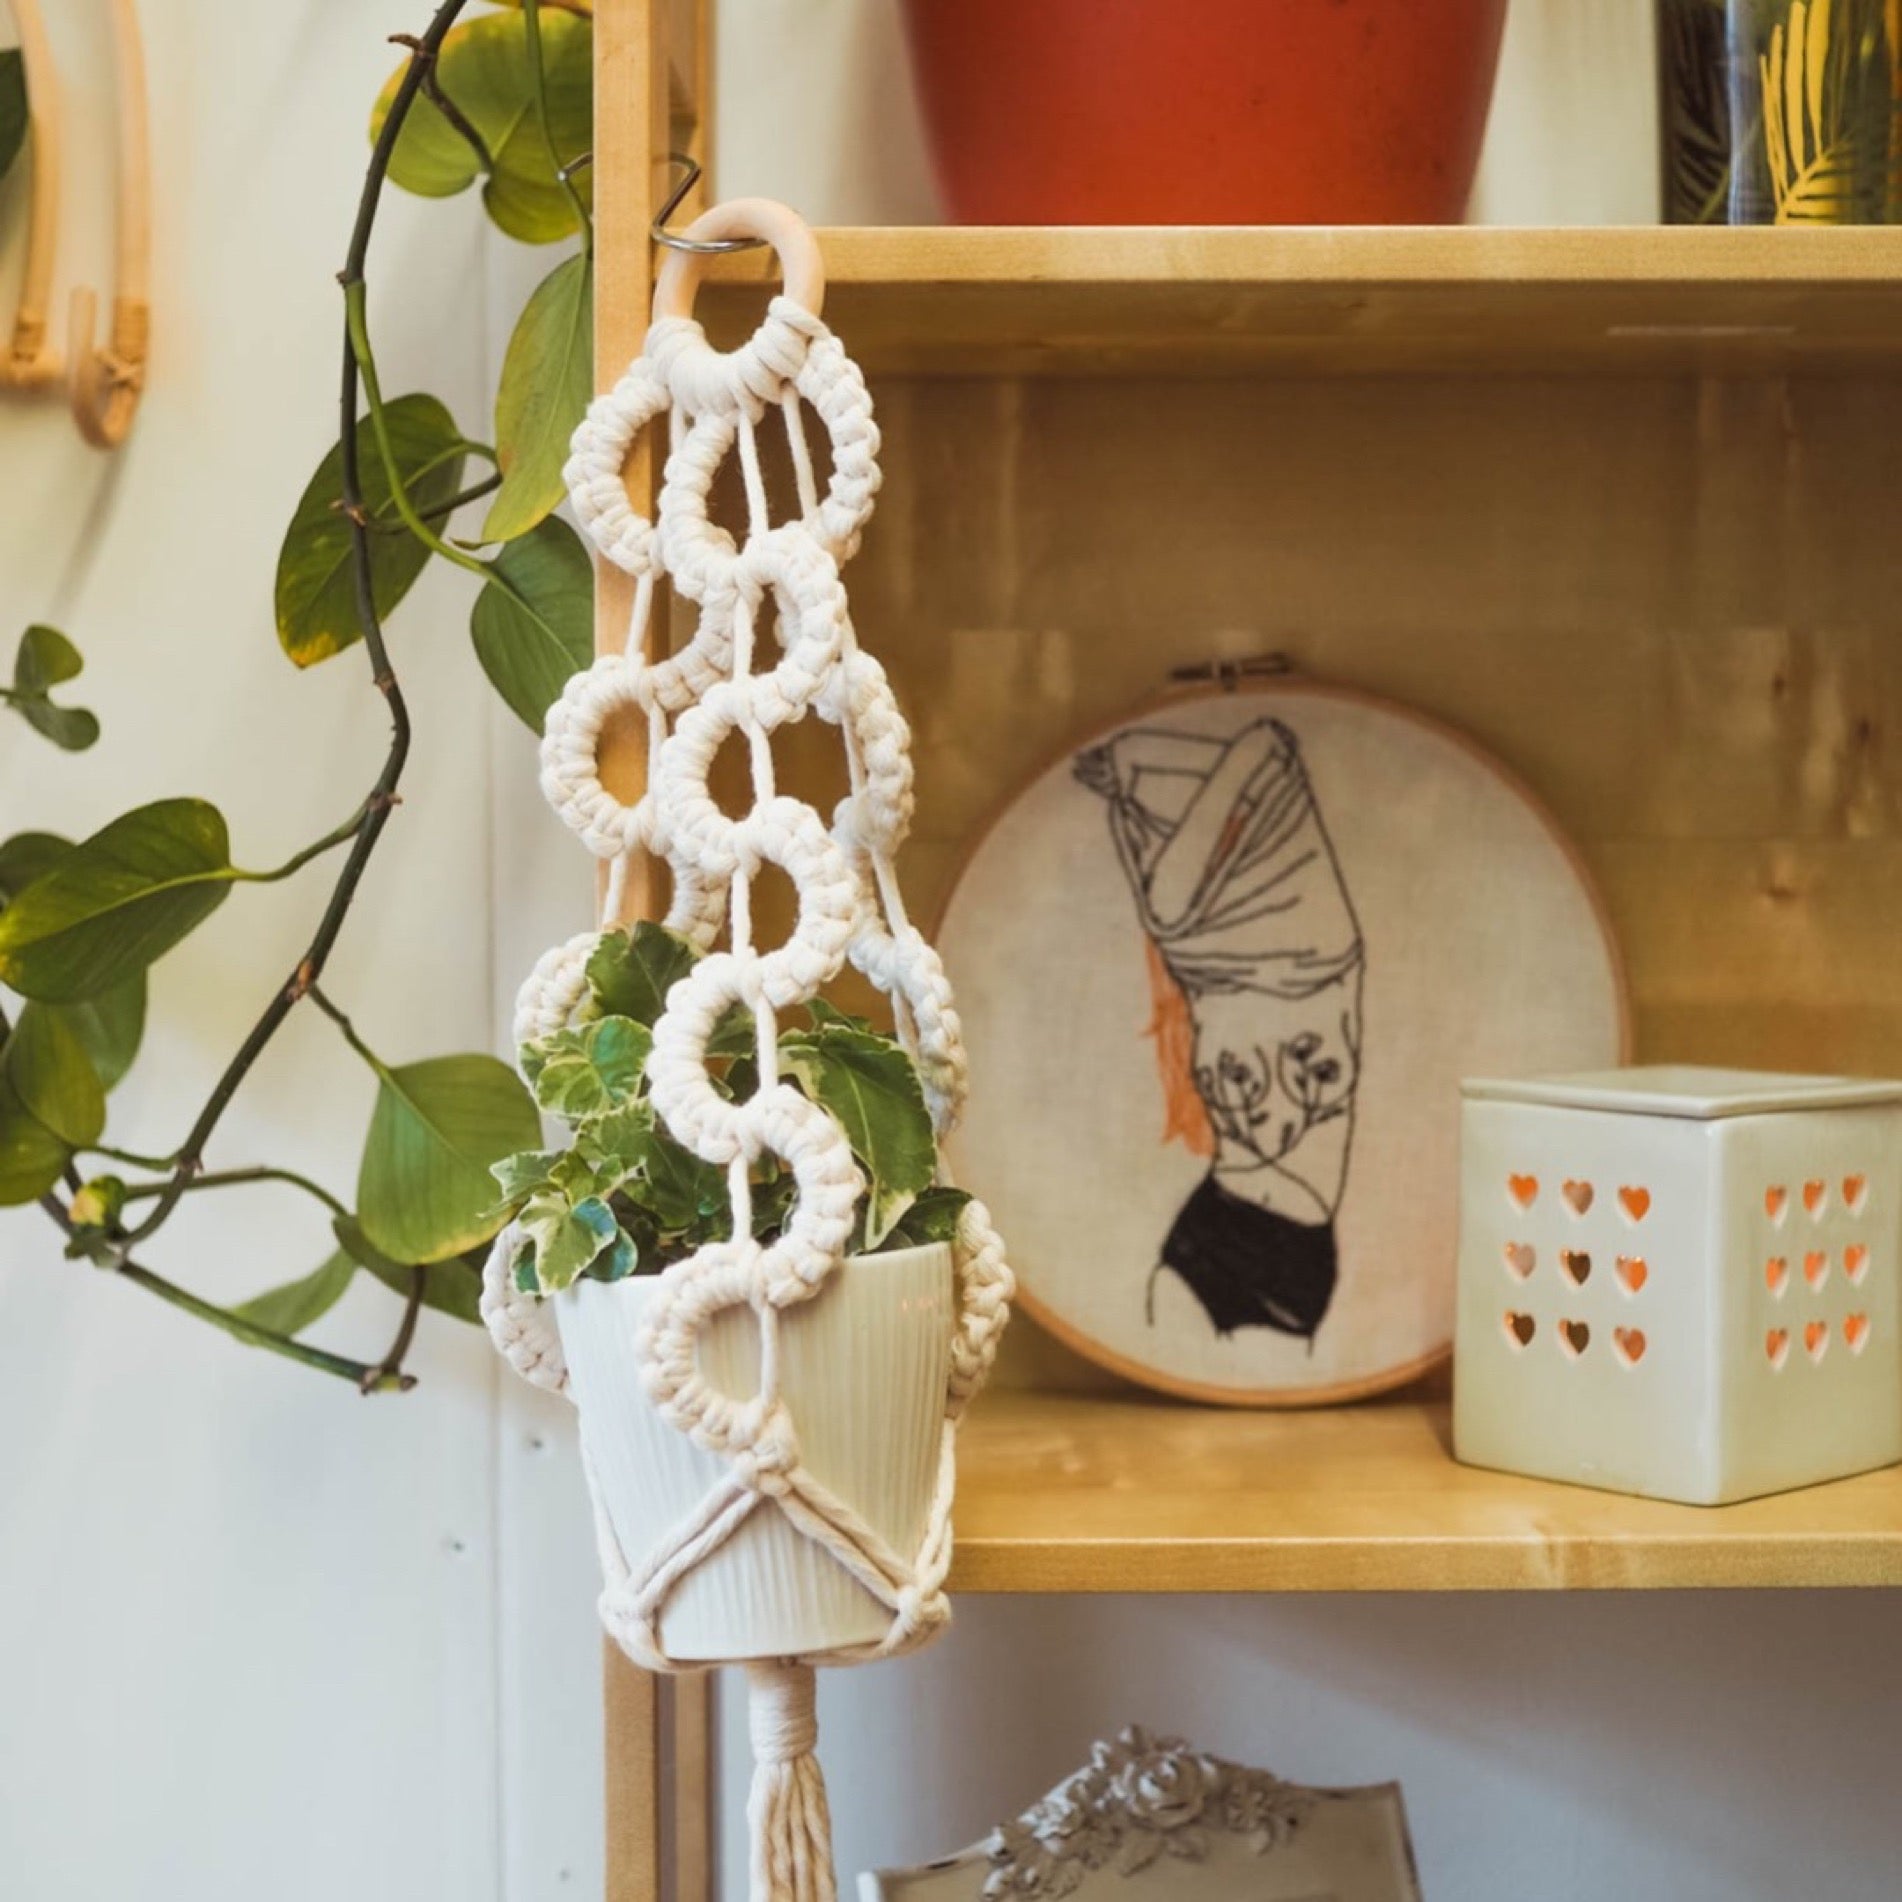 A wavy white macrame plant hanger hooked to shelves with cool boho ornaments on